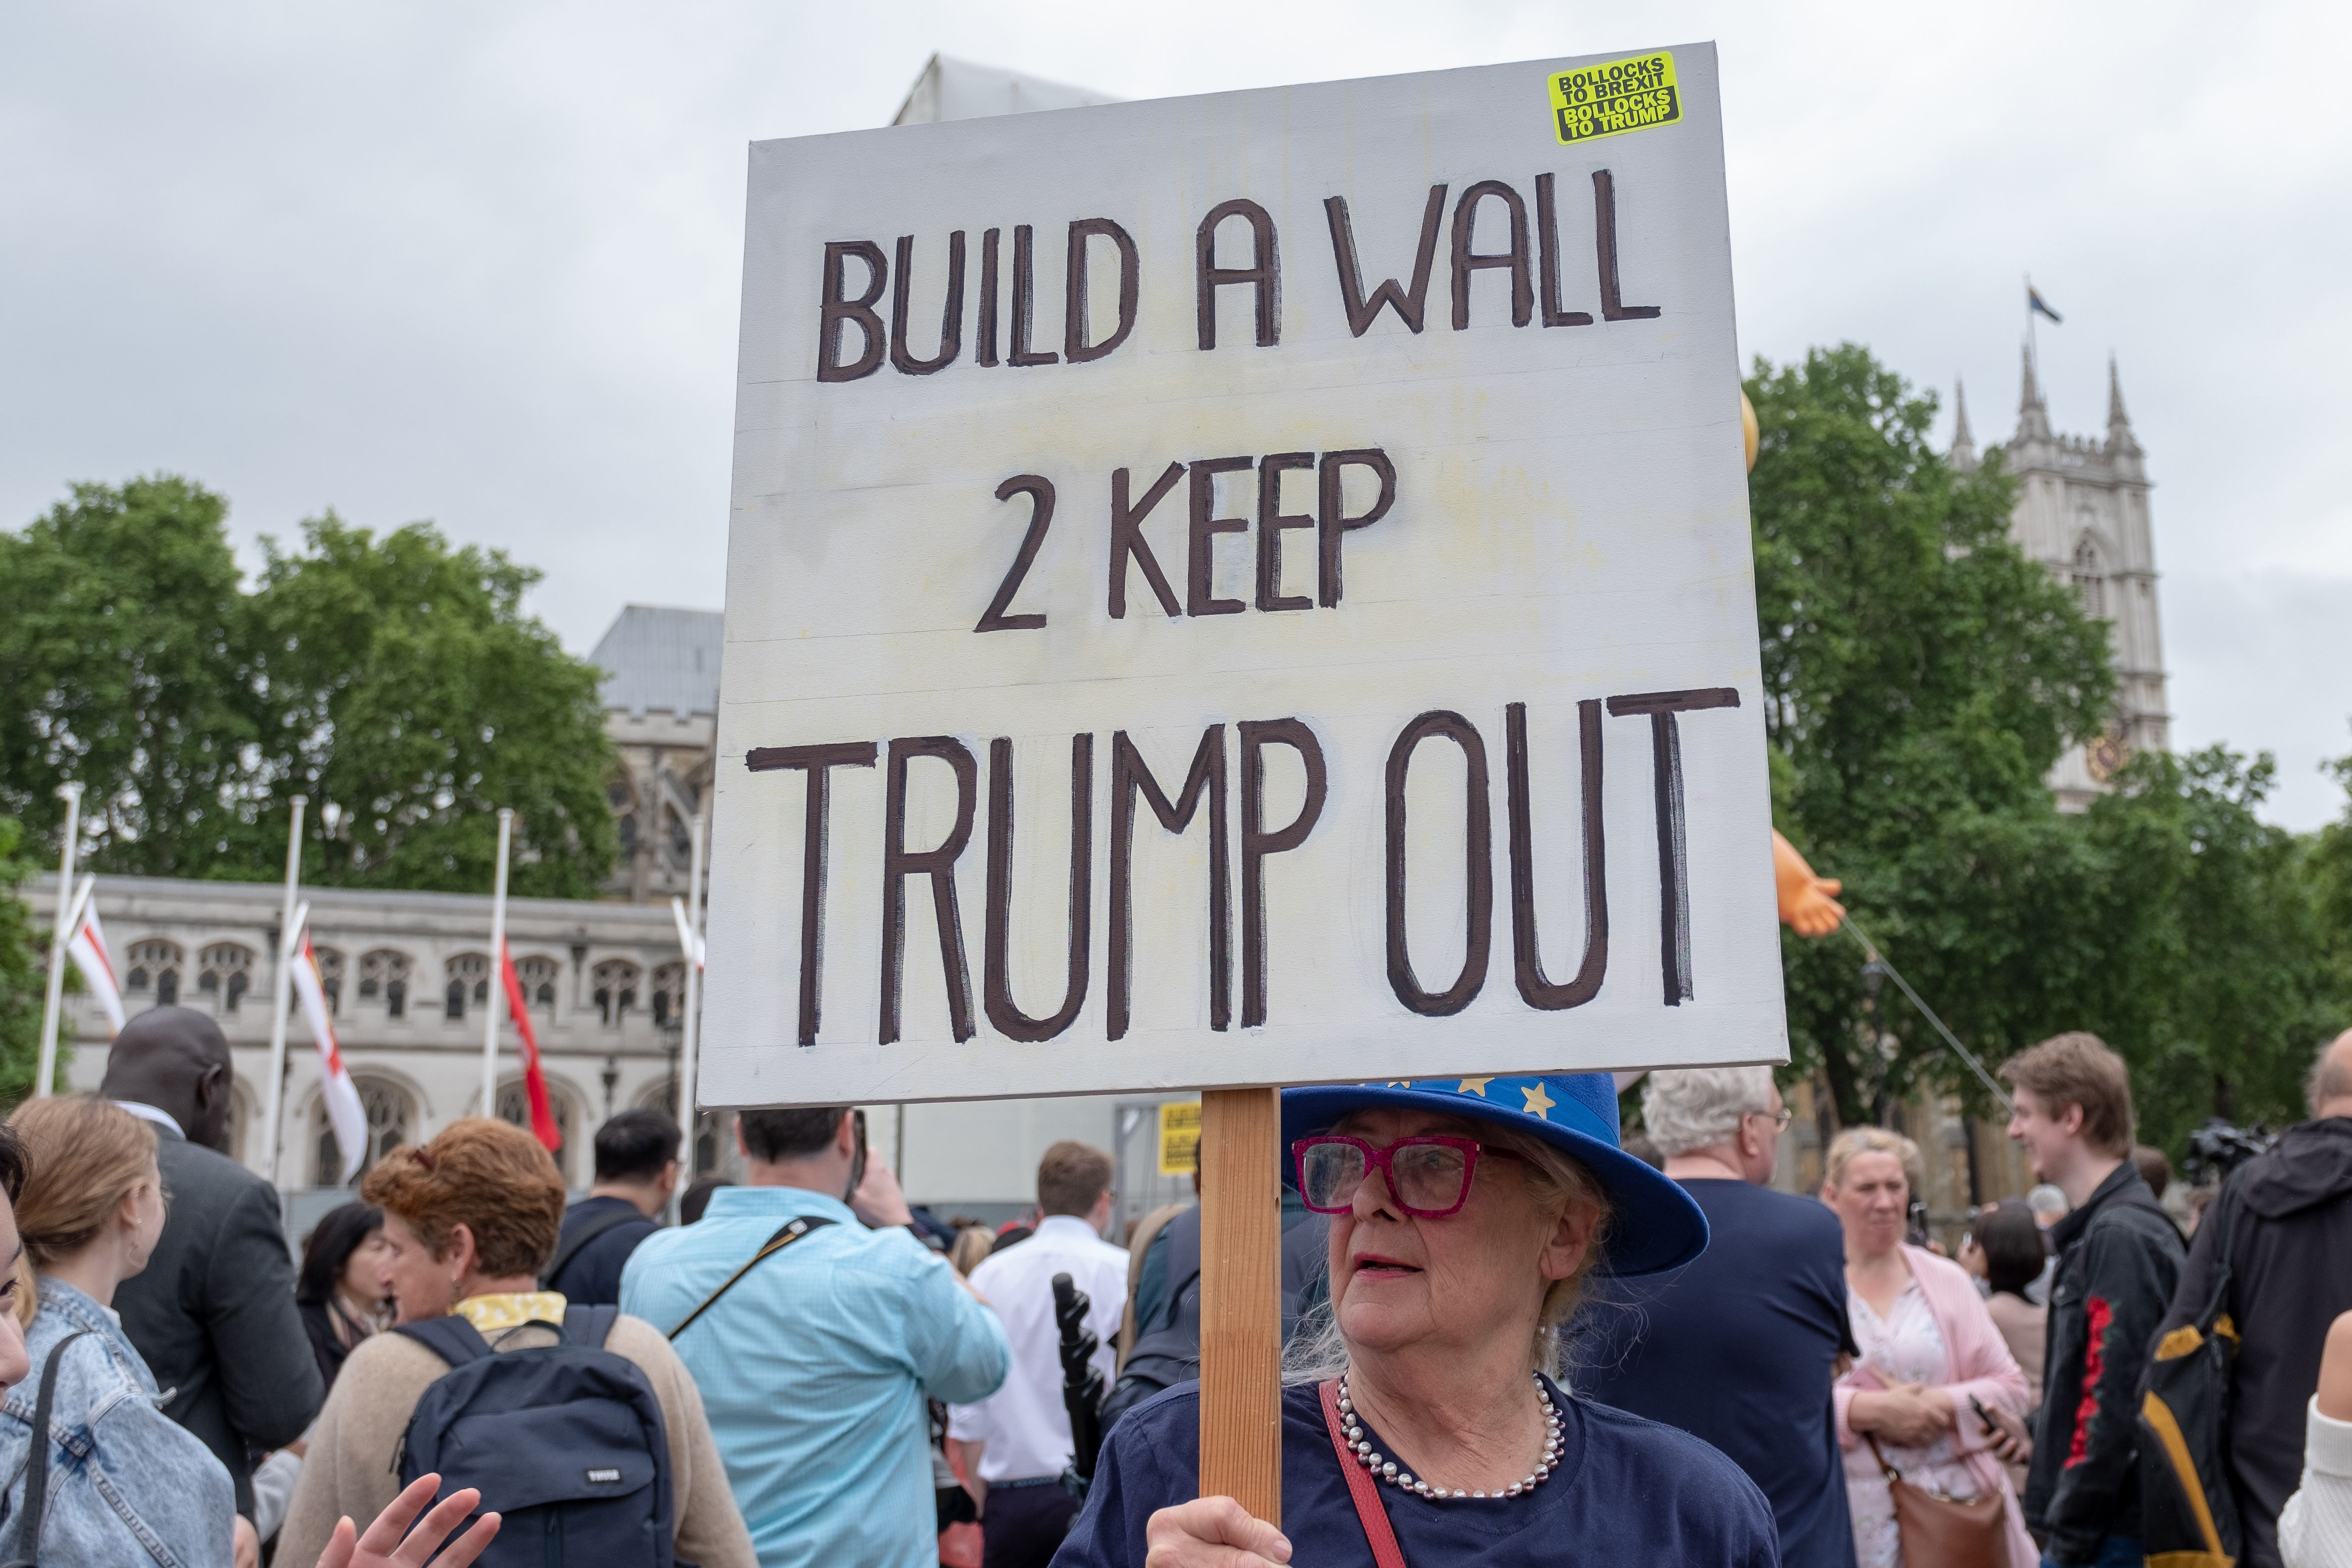  People protest against U.S President Donald Trump in London, United Kingdom on June 4, 2019.